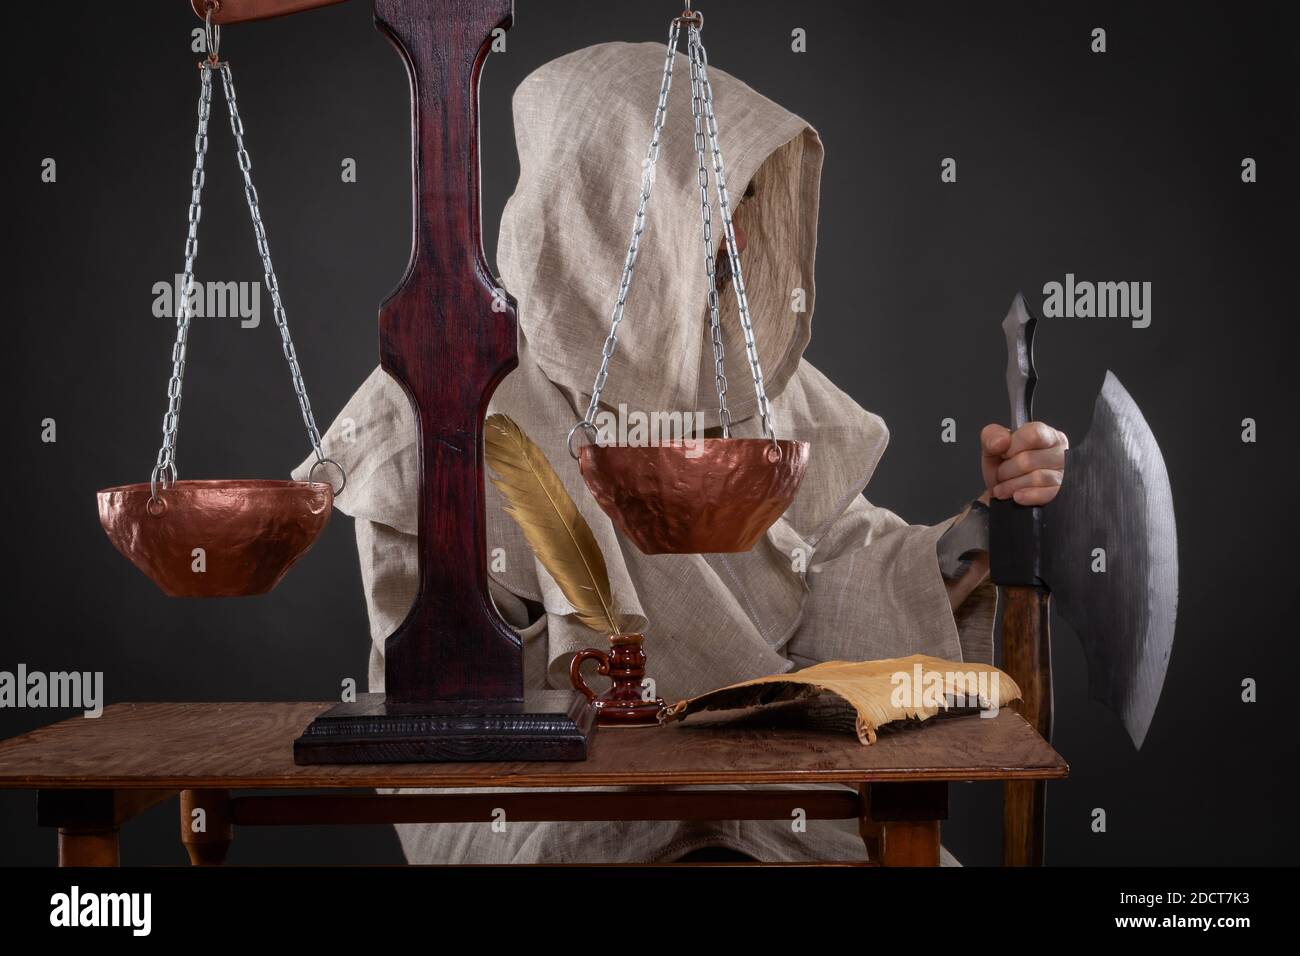 Halloween concept. The executioner of the holy inquisition with an ax weighing other people's sins Stock Photo